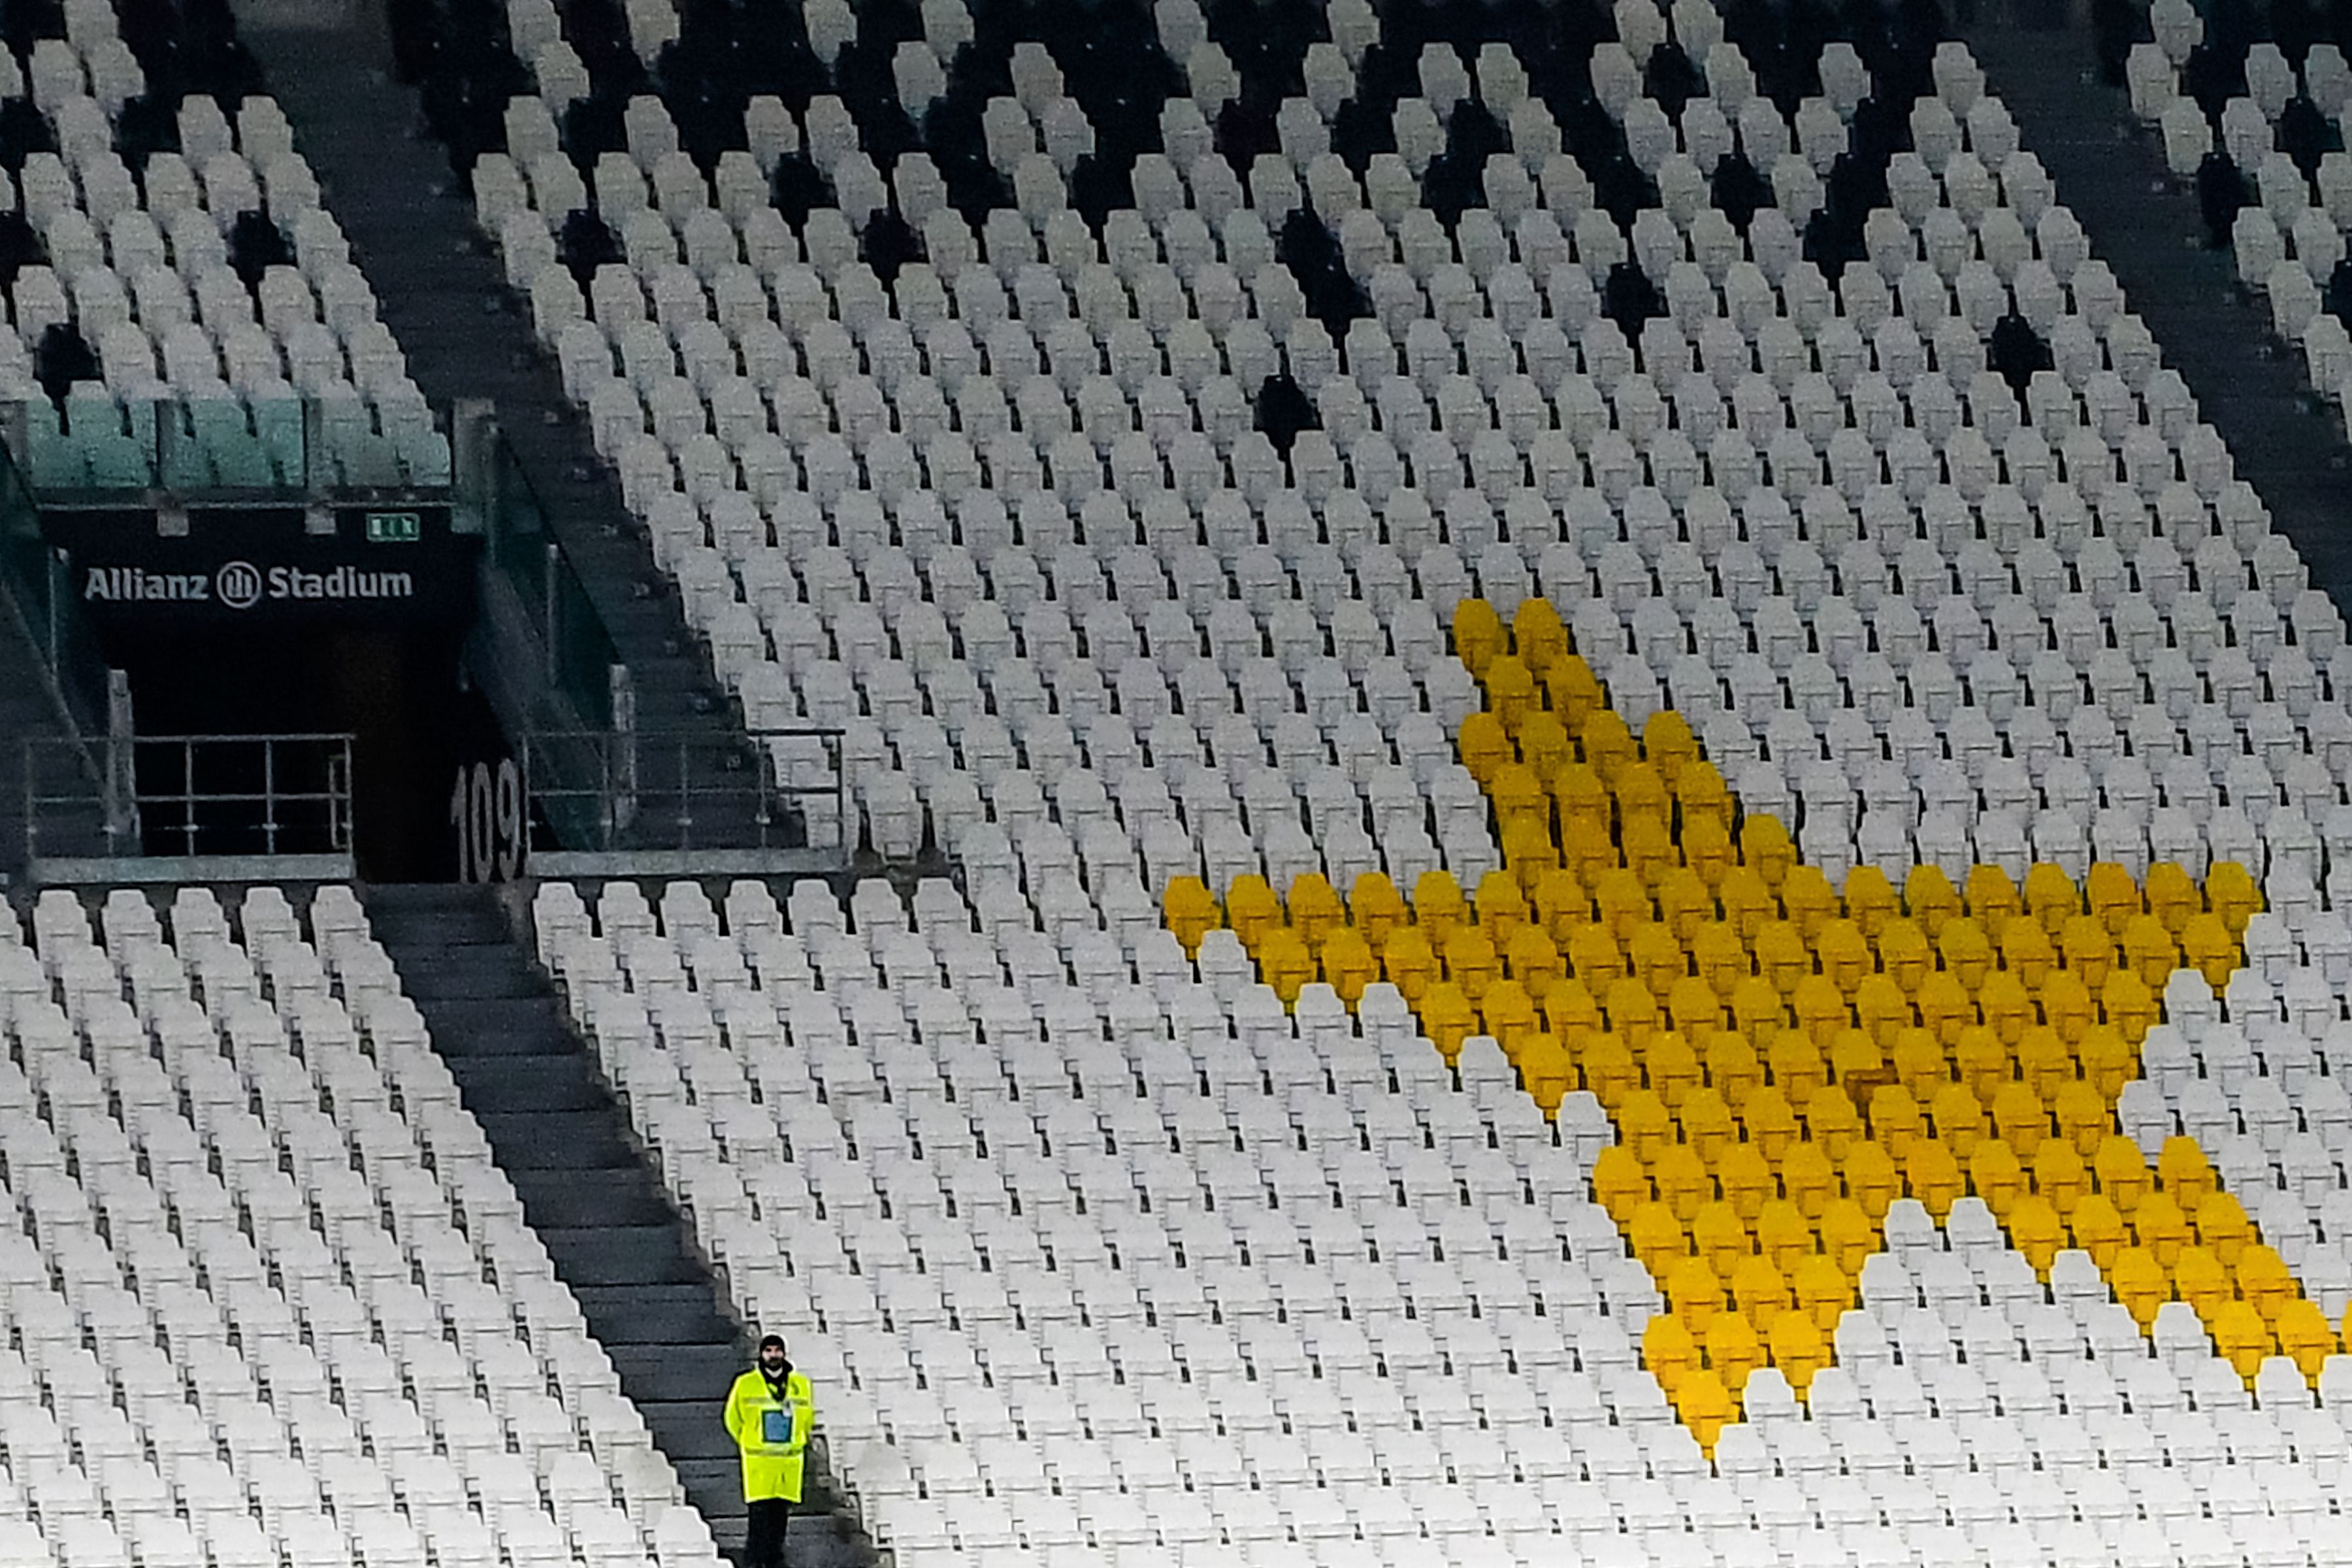 A stewart (Bottom L) stands in an empty tribune of the Allianz Juventus stadium on March 8, 2020 in Turin during the Italian Serie A football. (AFP Photo)